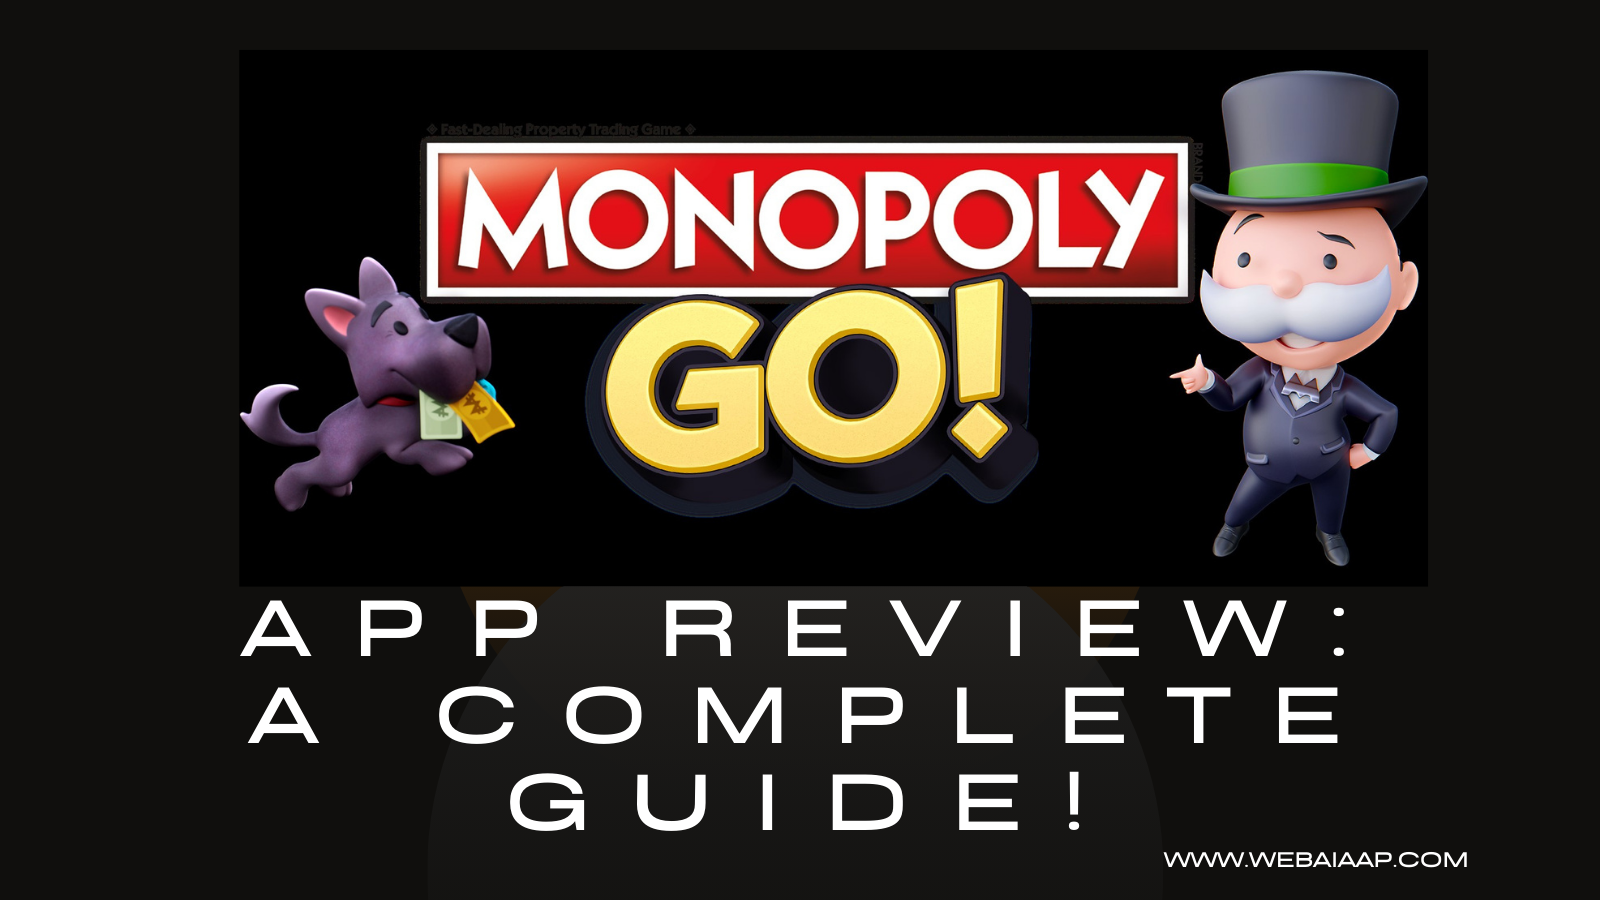 MONOPOLY GO! App Review A Complete Guide!